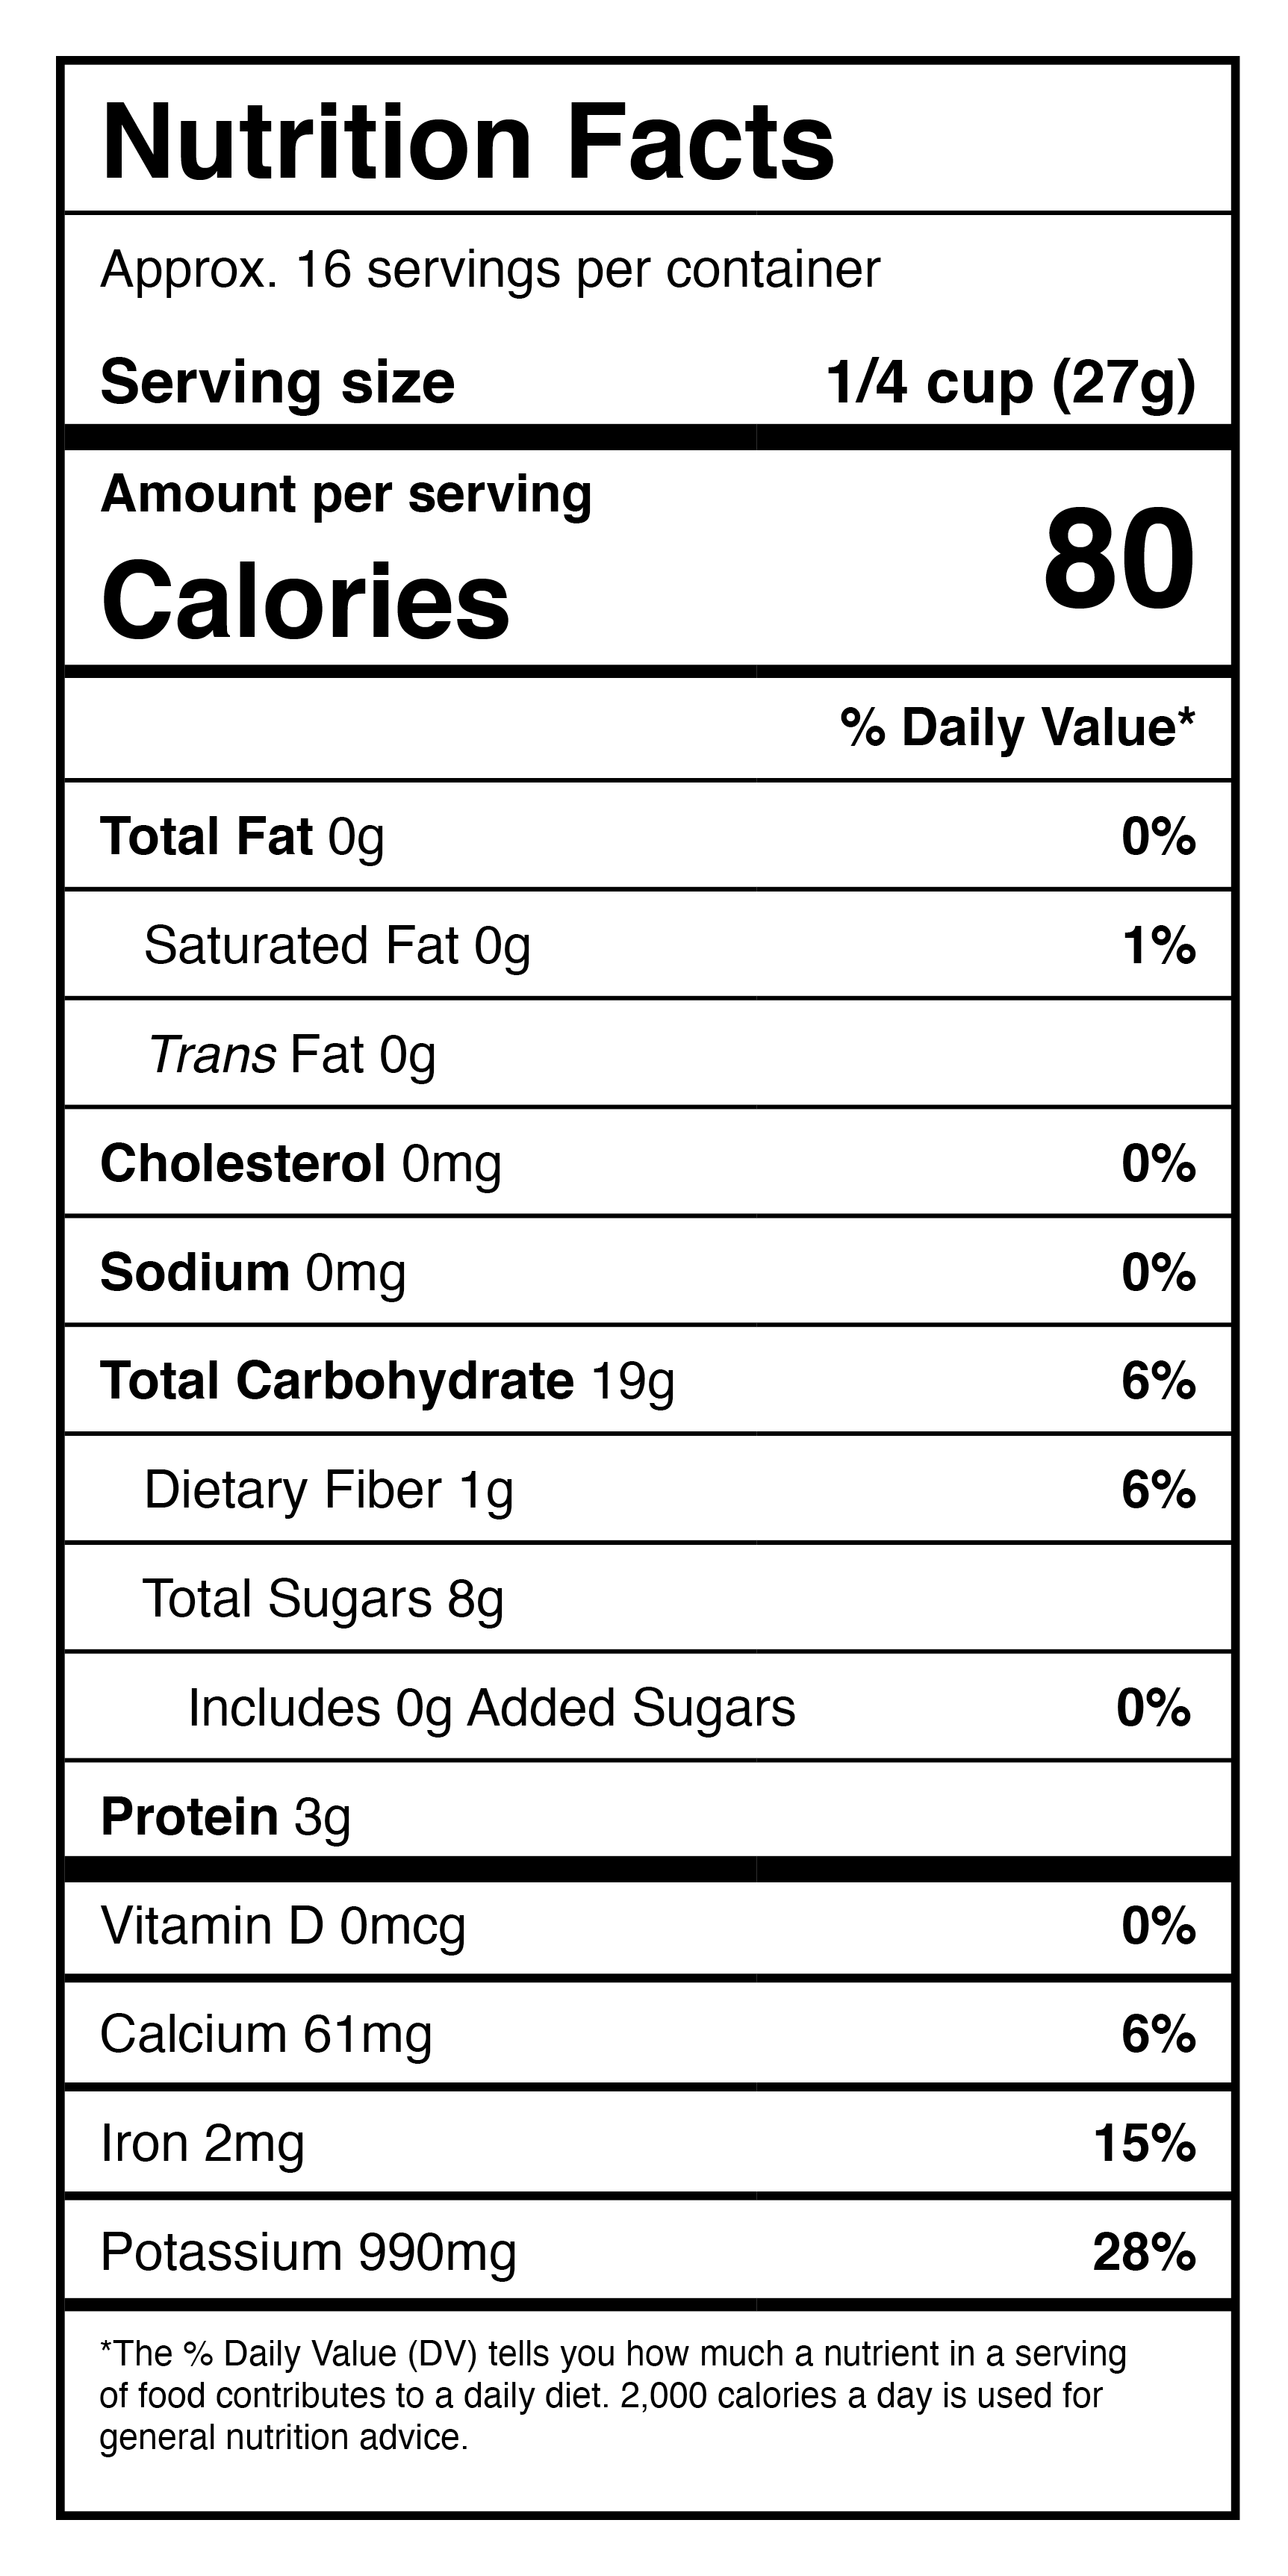 A nutrition label displaying the nutrition facts of Harmony House Organic Dried Pumpkin Dices.